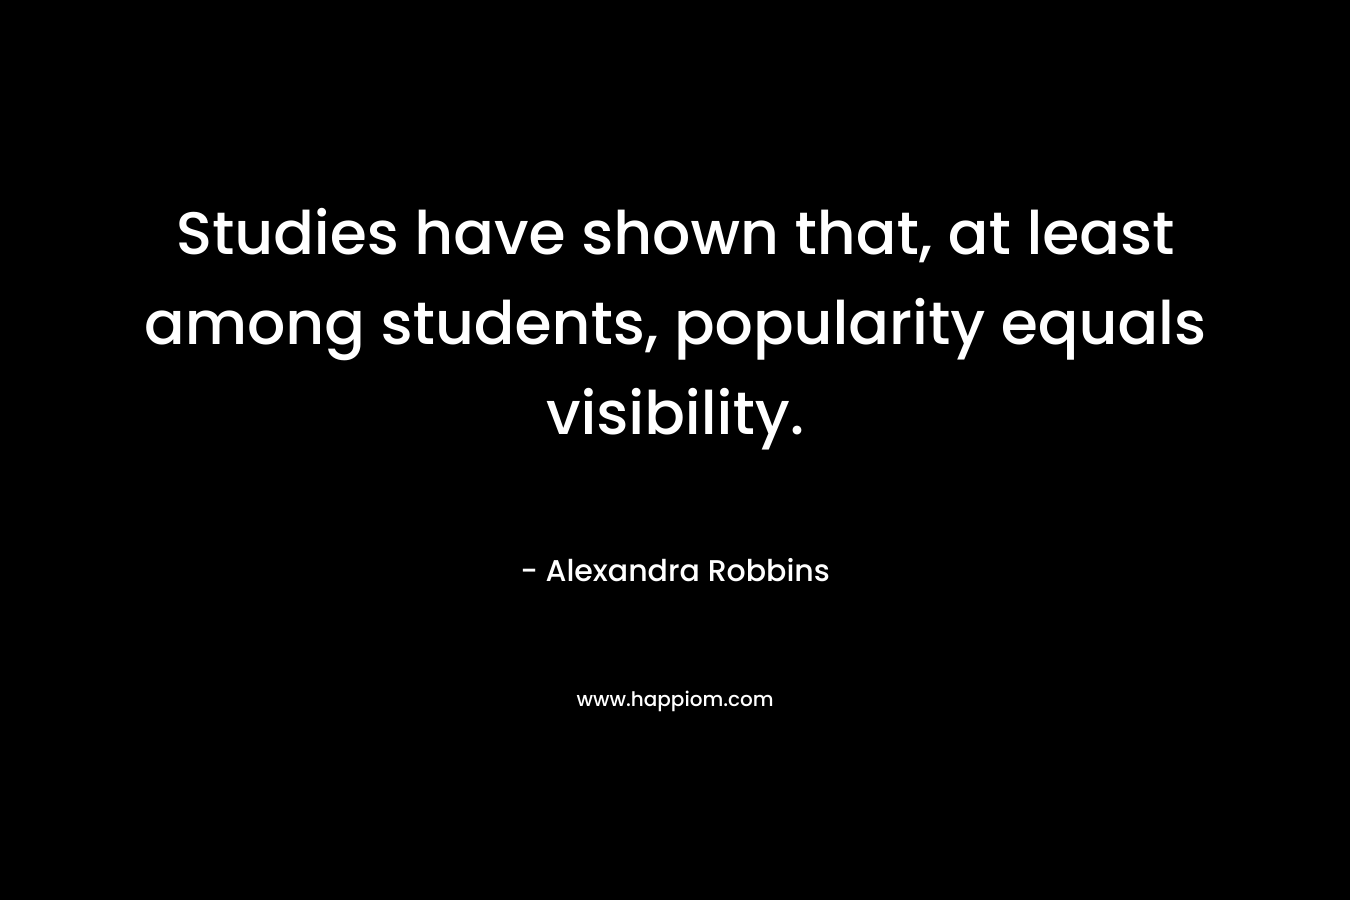 Studies have shown that, at least among students, popularity equals visibility. – Alexandra Robbins